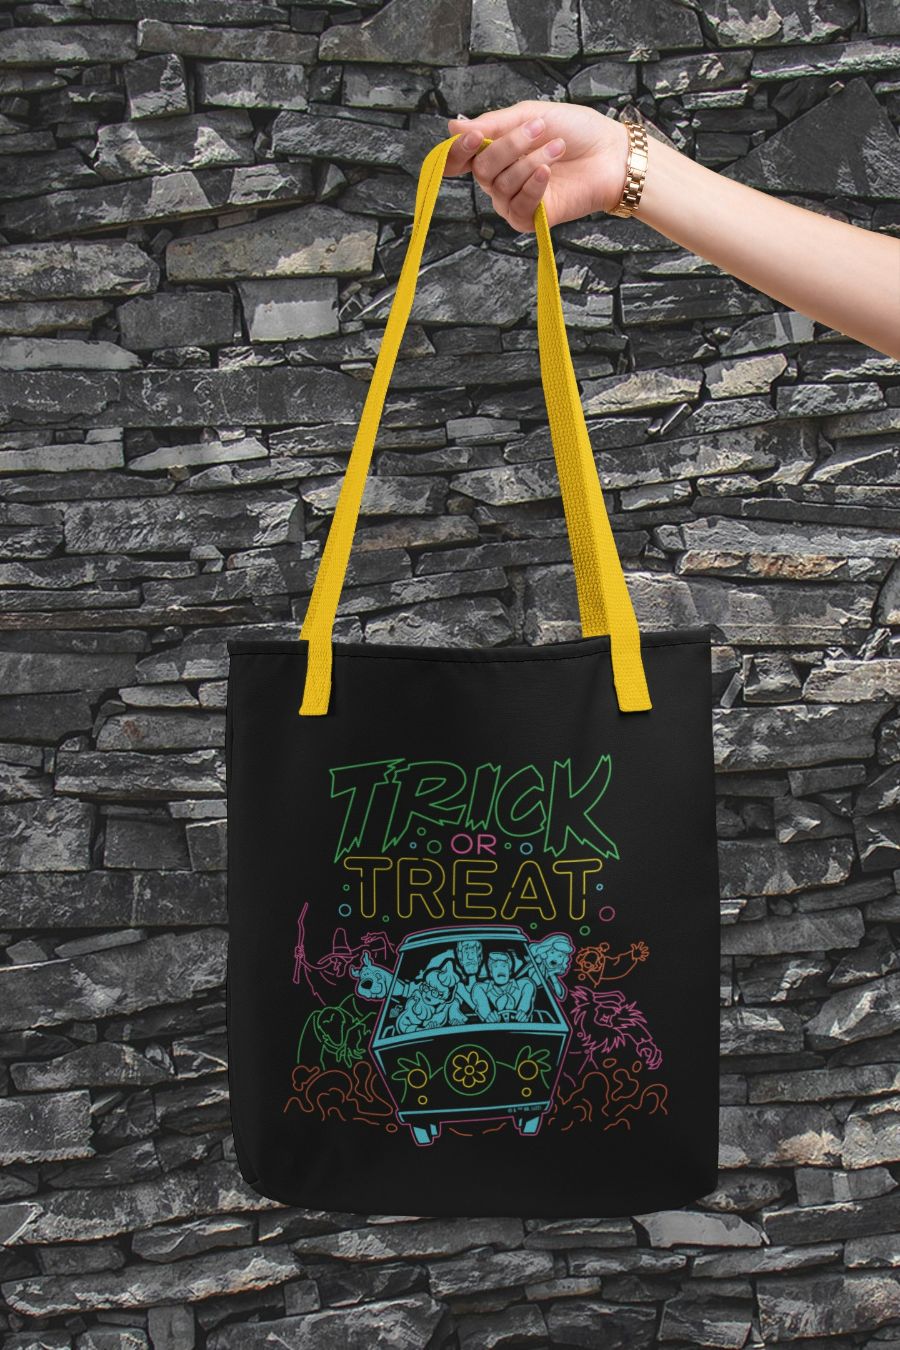 SD-Scoobtober_brick-mockup-of-a-hand-holding-a-customizable-strap-tote-bag-against-a-flat-surface-28832